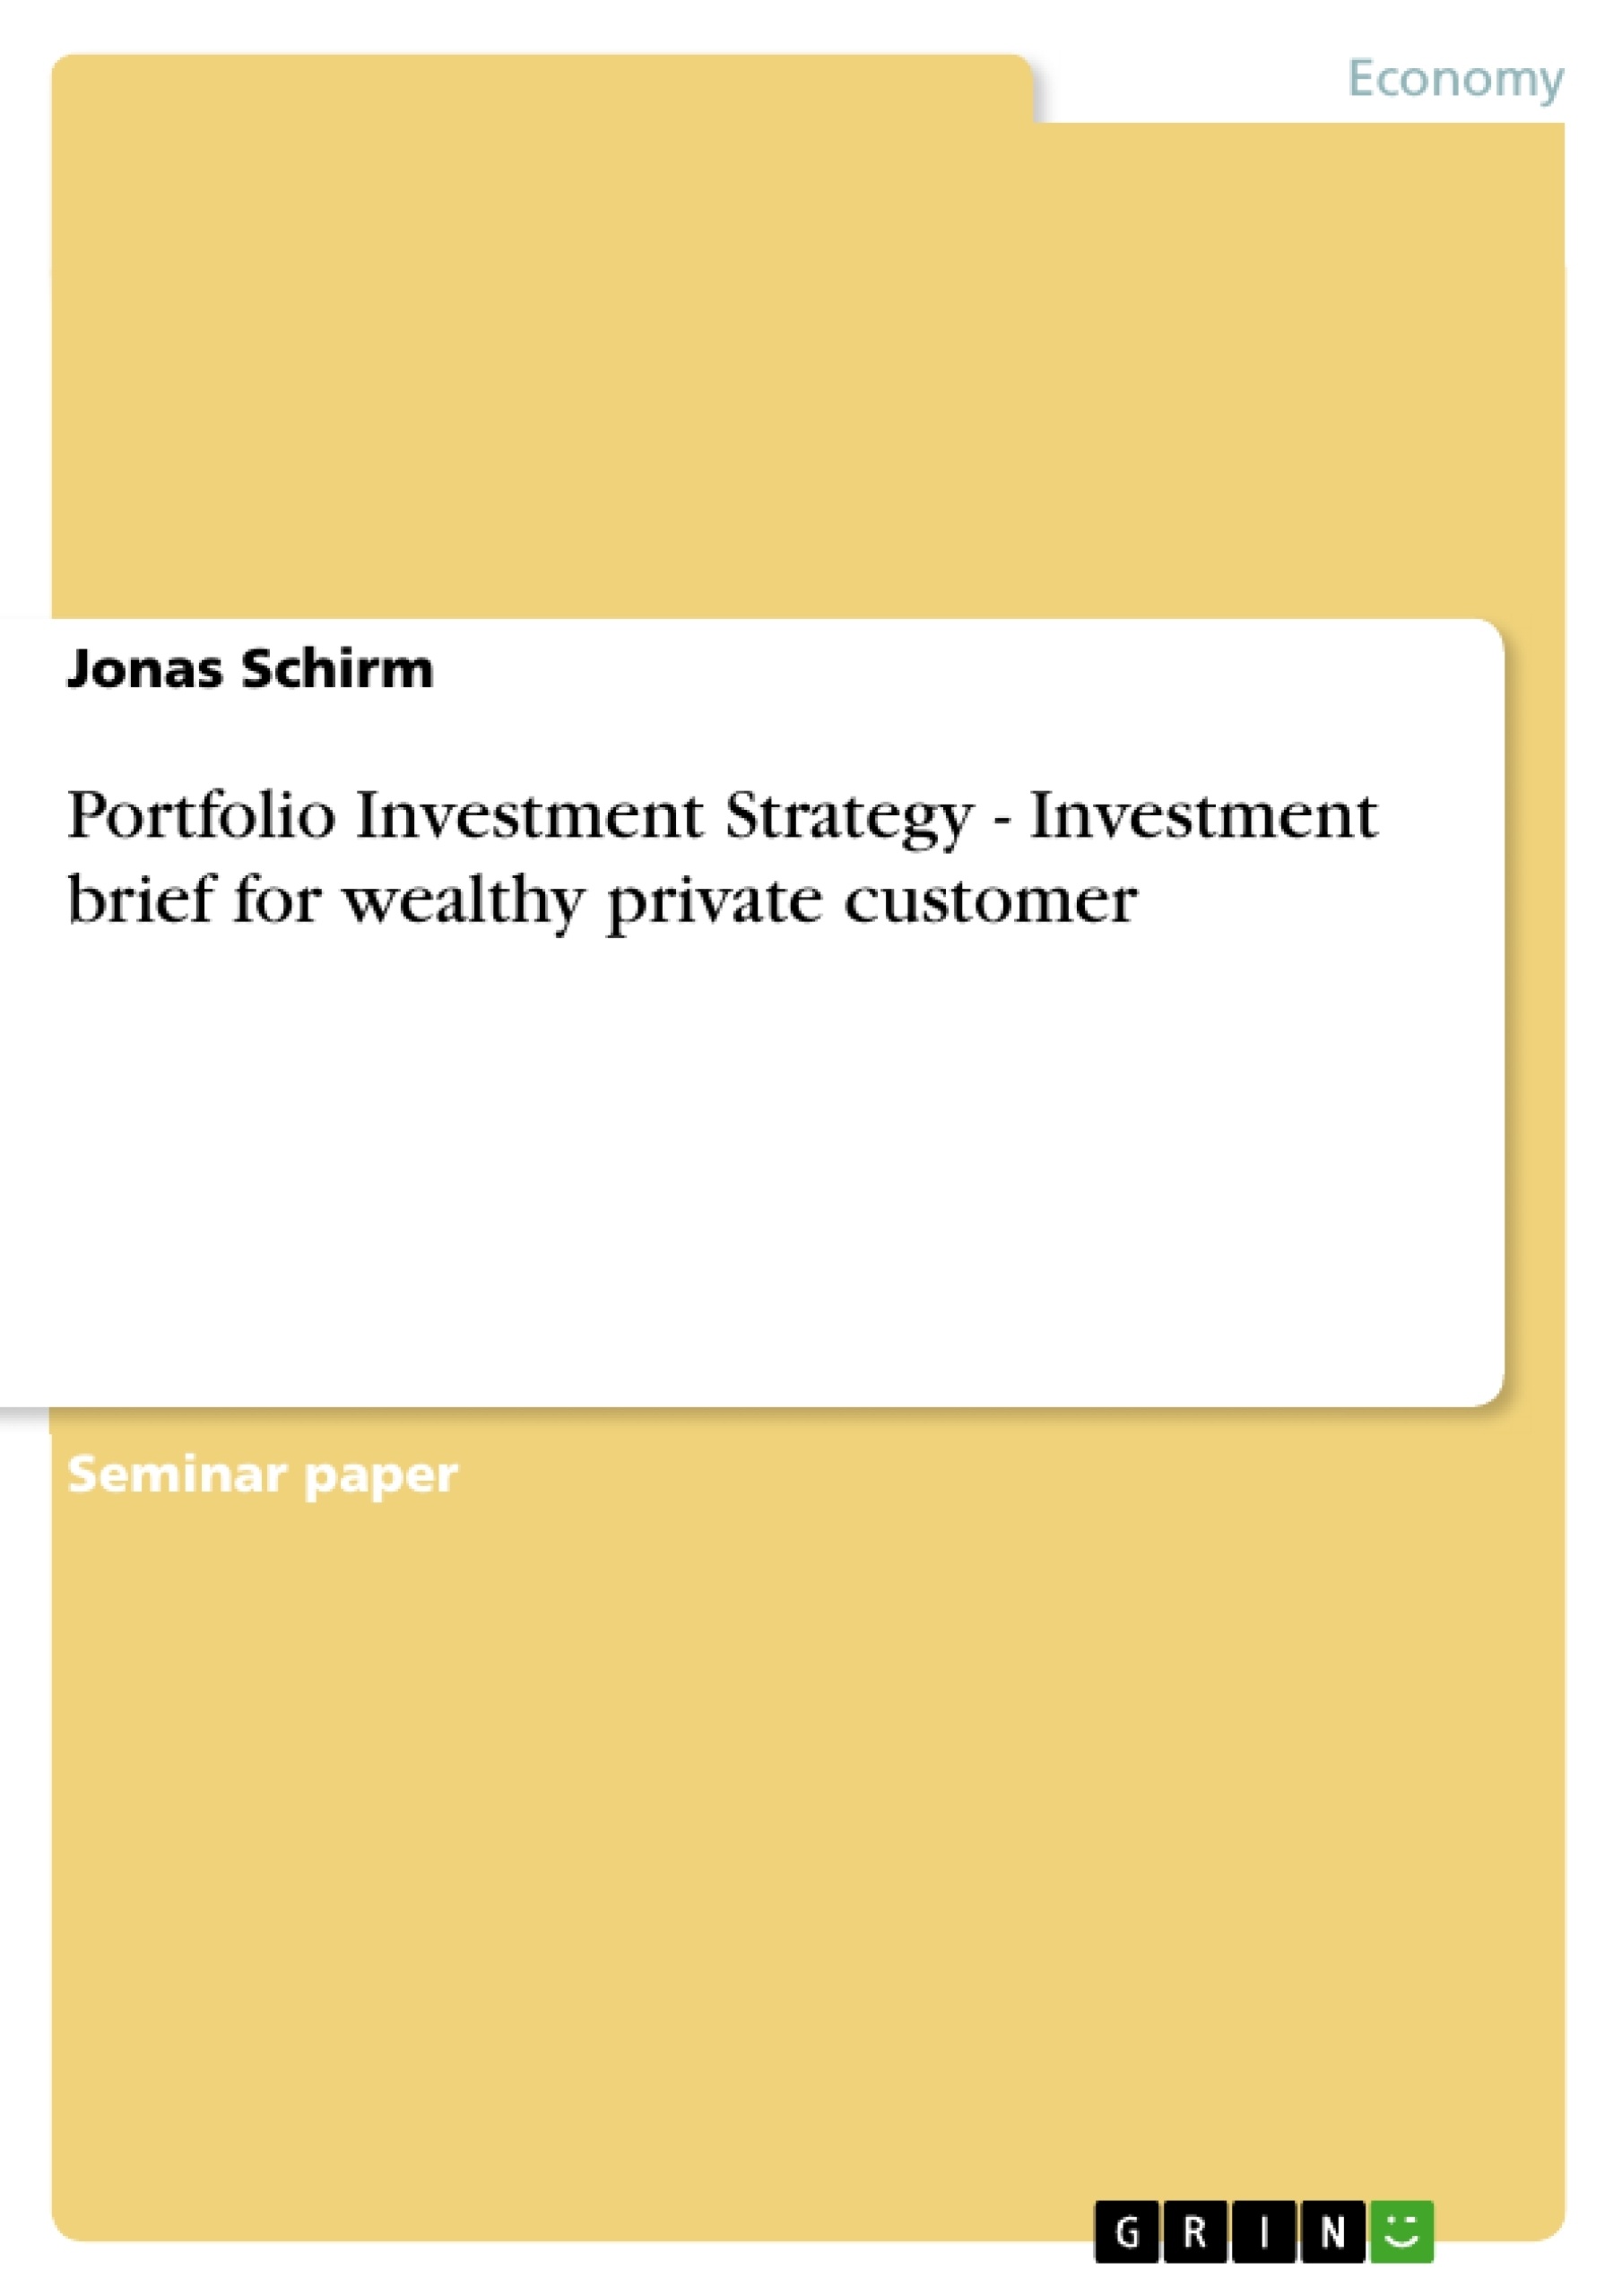 Título: Portfolio Investment Strategy - Investment brief for wealthy private customer